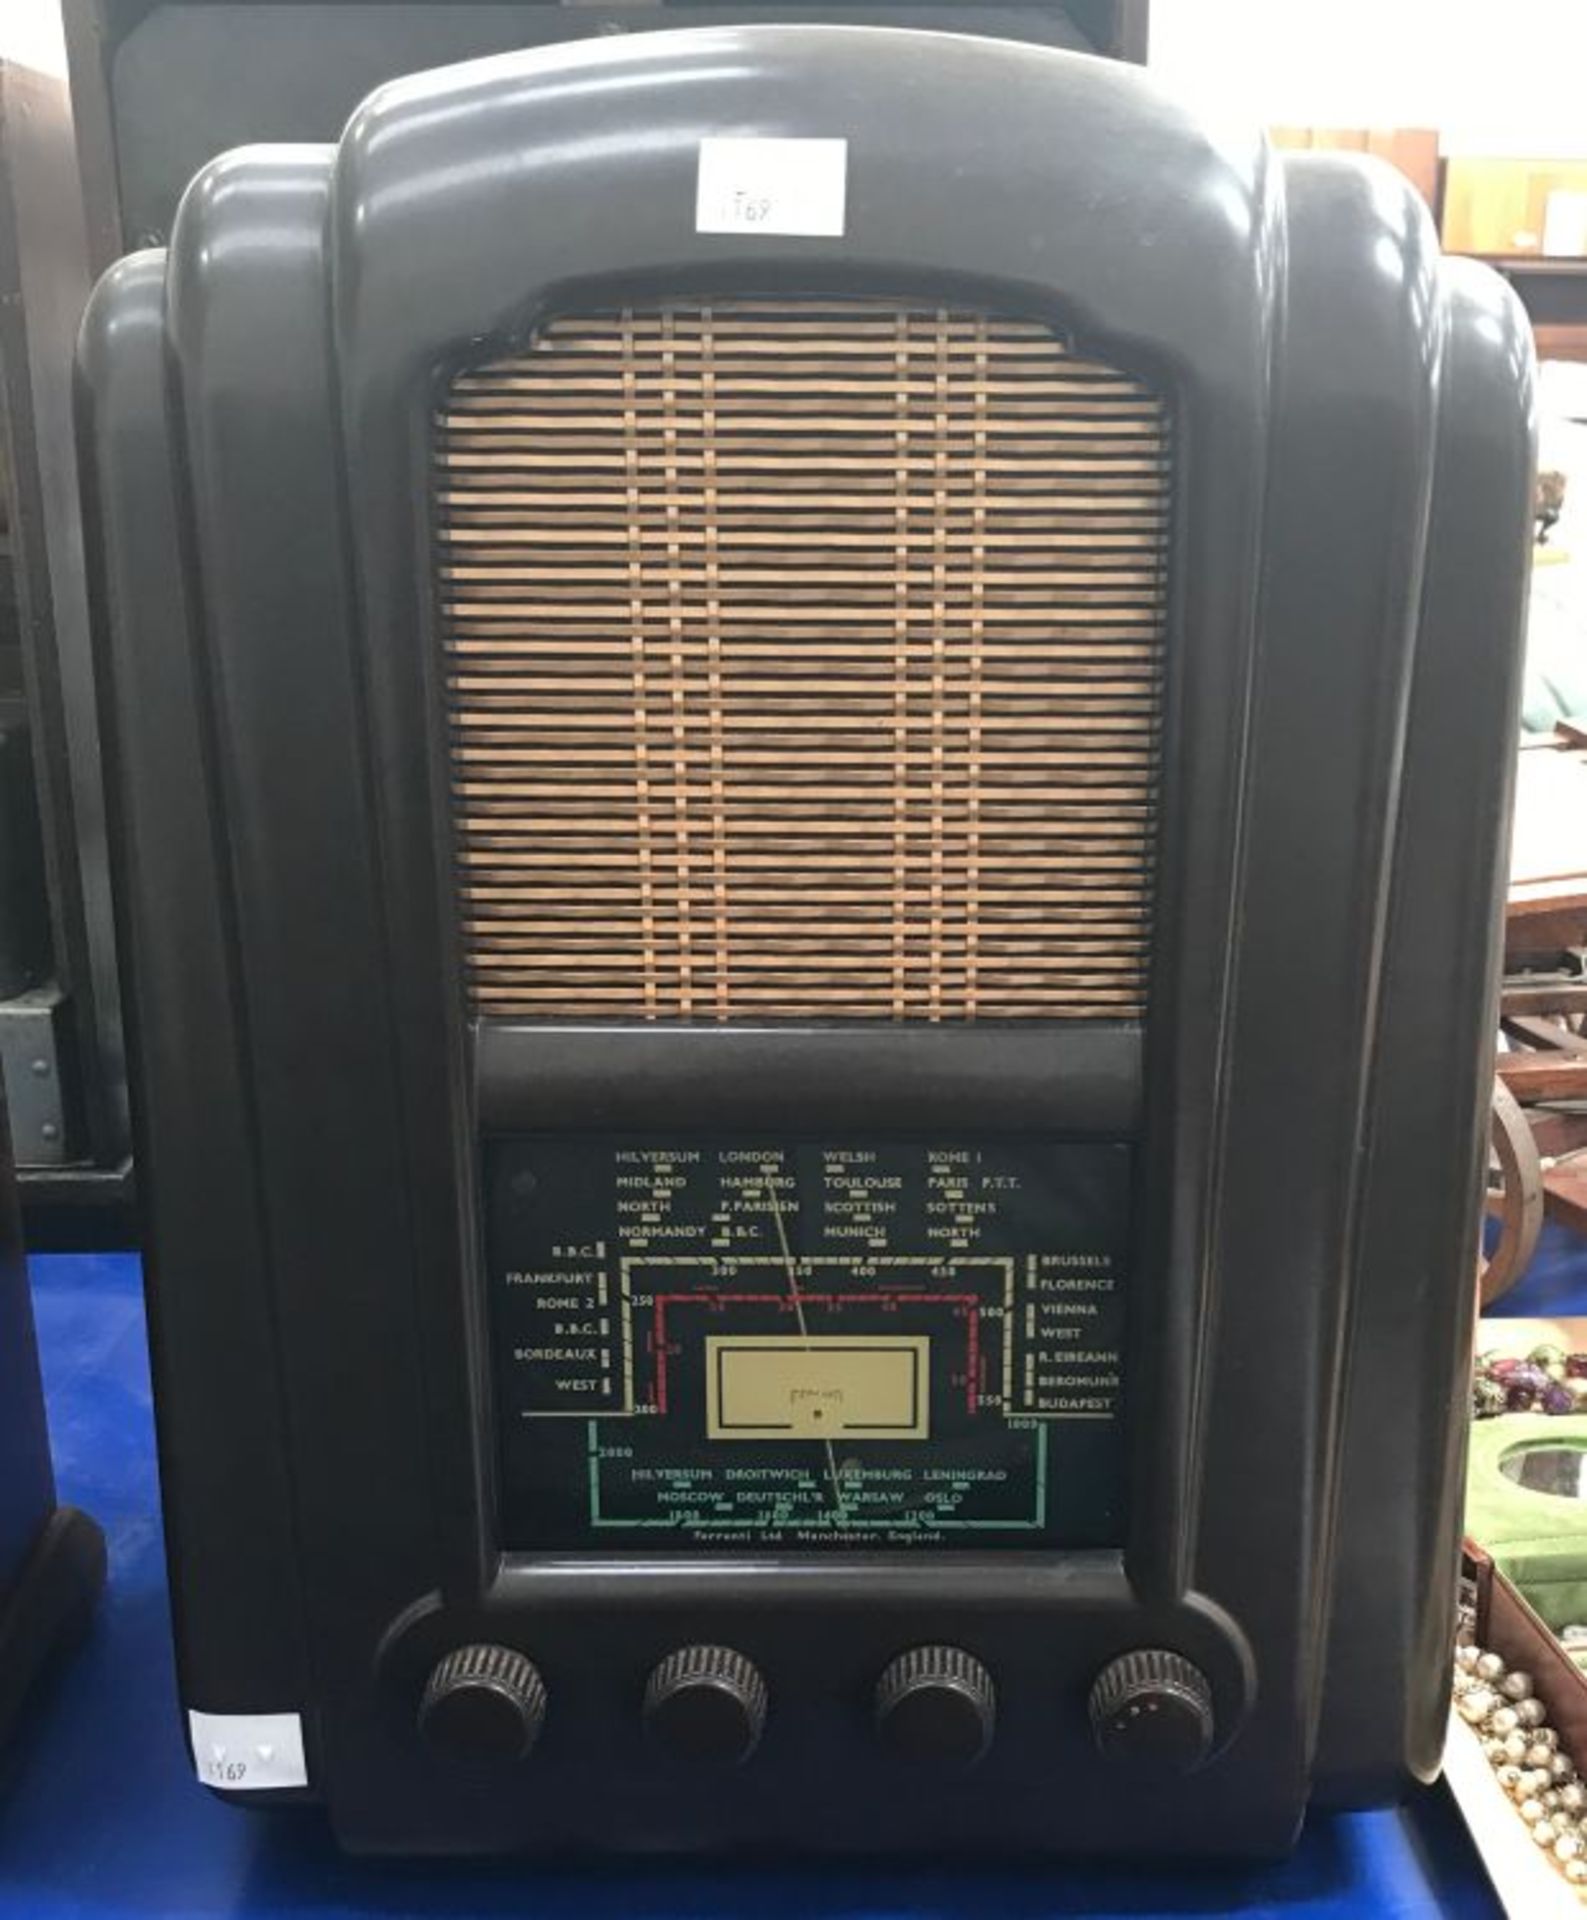 1945 Radio - Ferranti 145 Bakelite. NB All radios in restored condition but sold as collector's